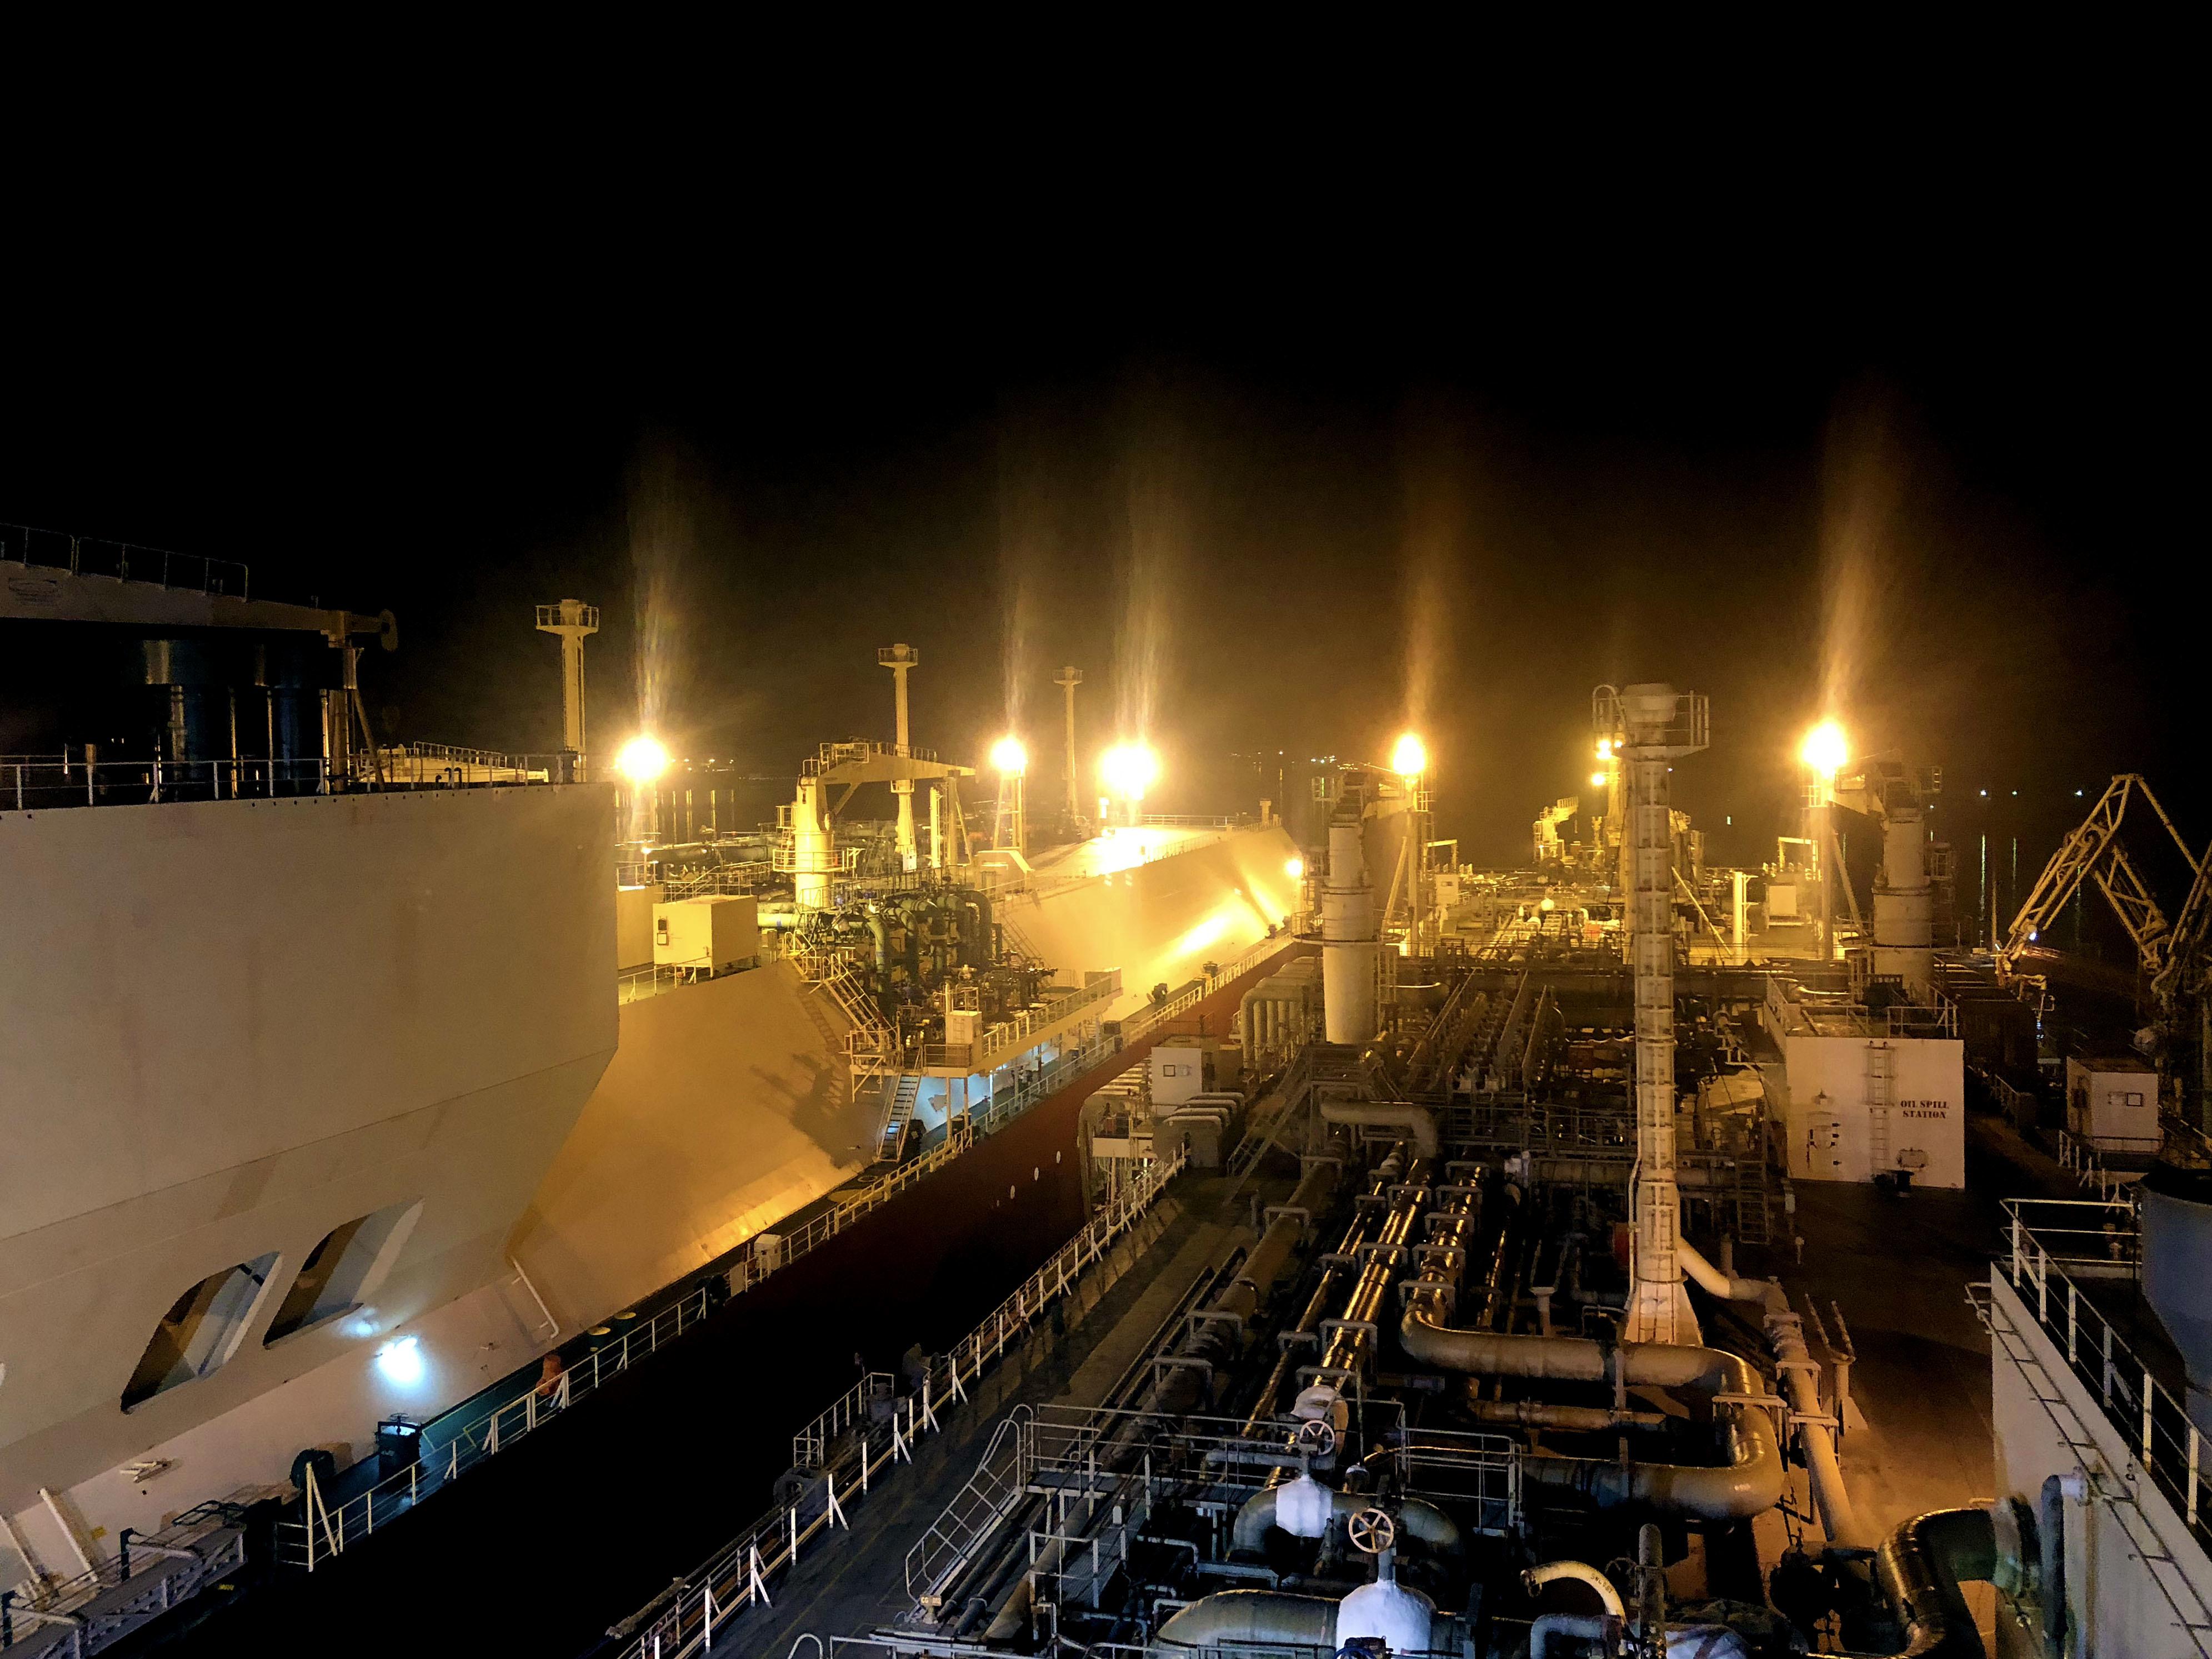 FSRU Exquisite completes 200th STS LNG transfer in Pakistan